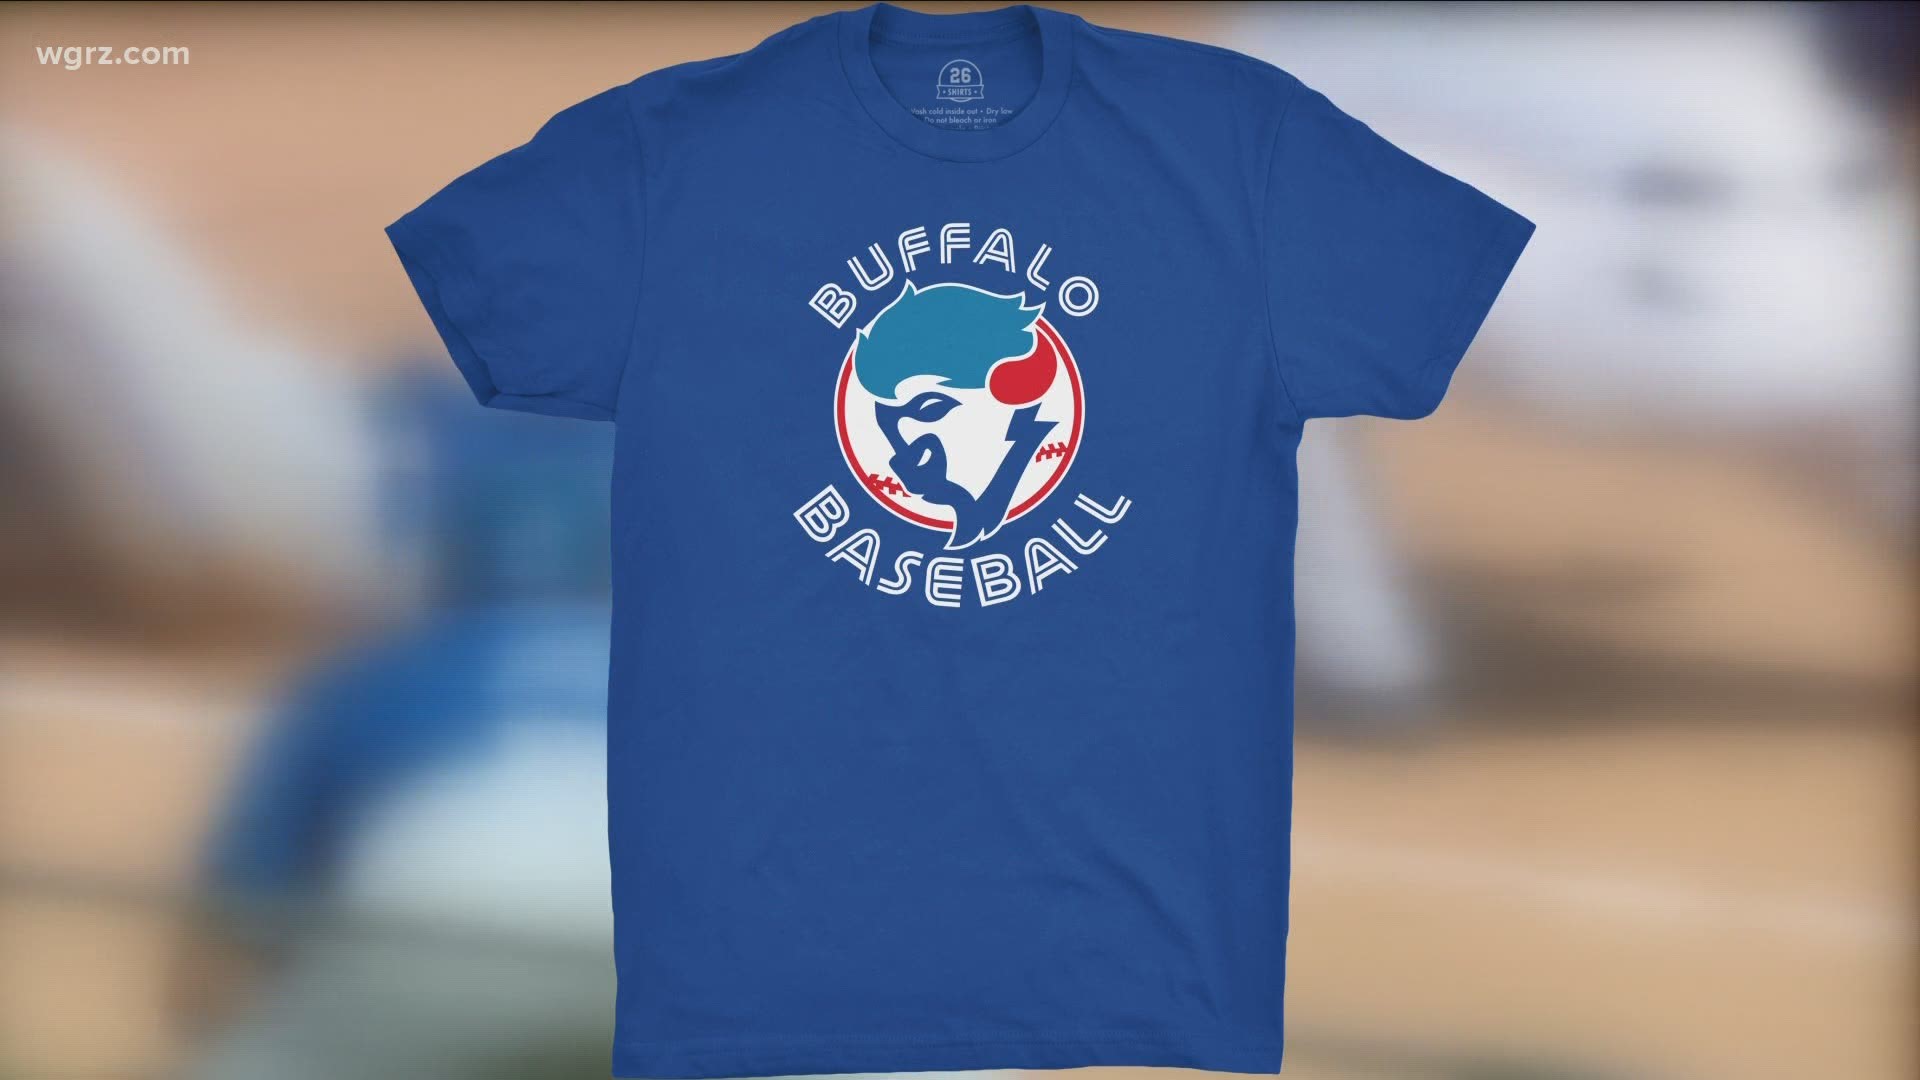 26 Shirts is at it again, this time with t-shirts and baseball caps to commemorate baseball history in Buffalo.